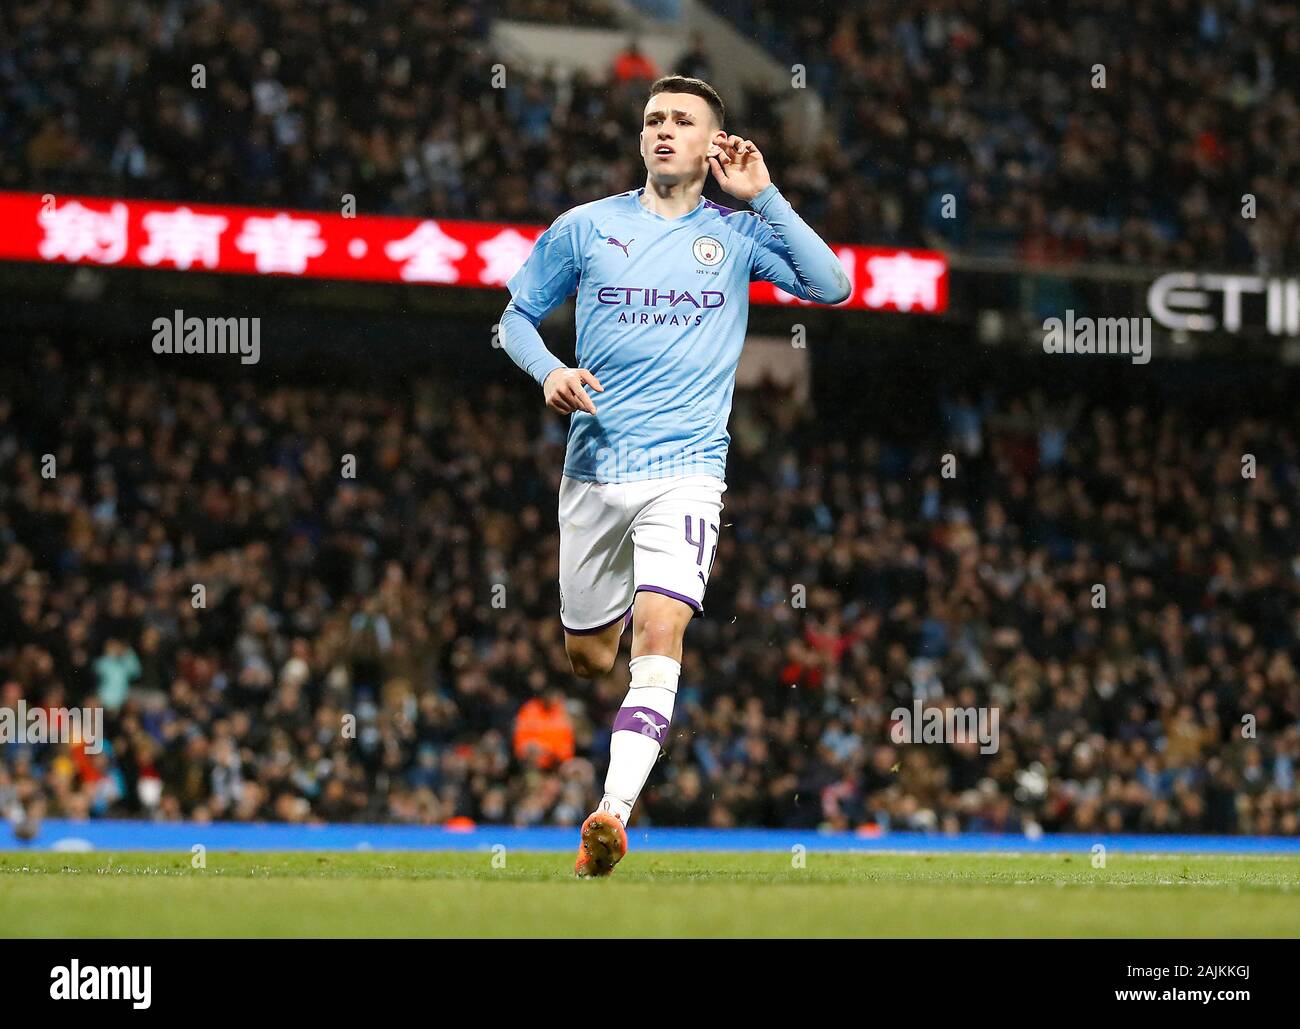 Manchester City's Phil Foden celebrates scoring his side's fourth goal of the game during the FA Cup third round match at the Etihad Stadium, Manchester. Stock Photo